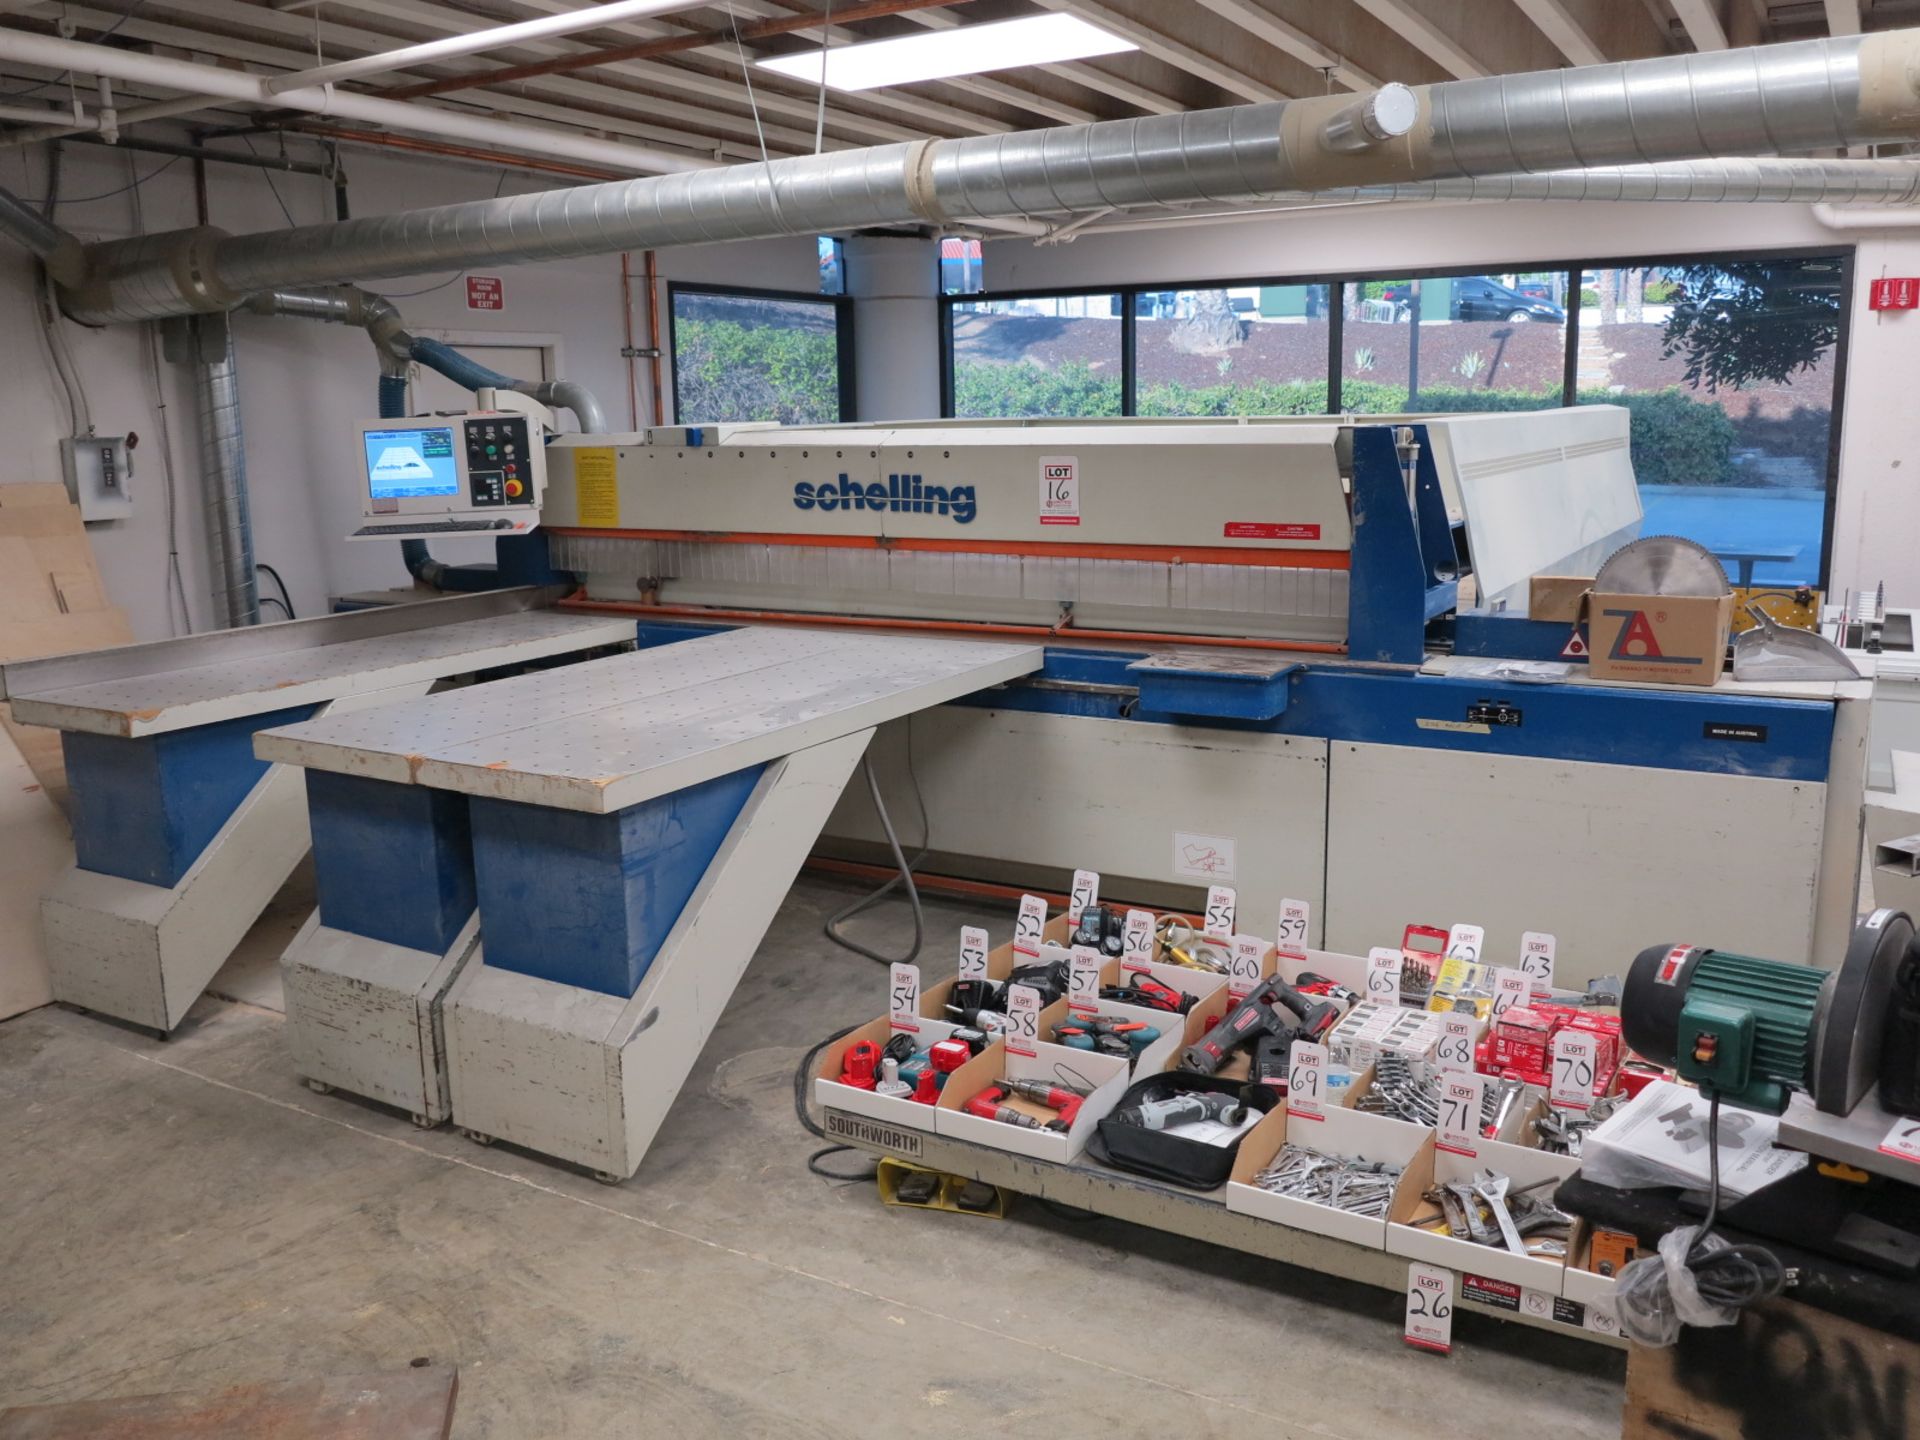 1994 SCHELLING CNC PANEL SAW, TYPE FI 330, FRONT LOADING, WIN COMMANDER CNC FI 330 CONTROL &